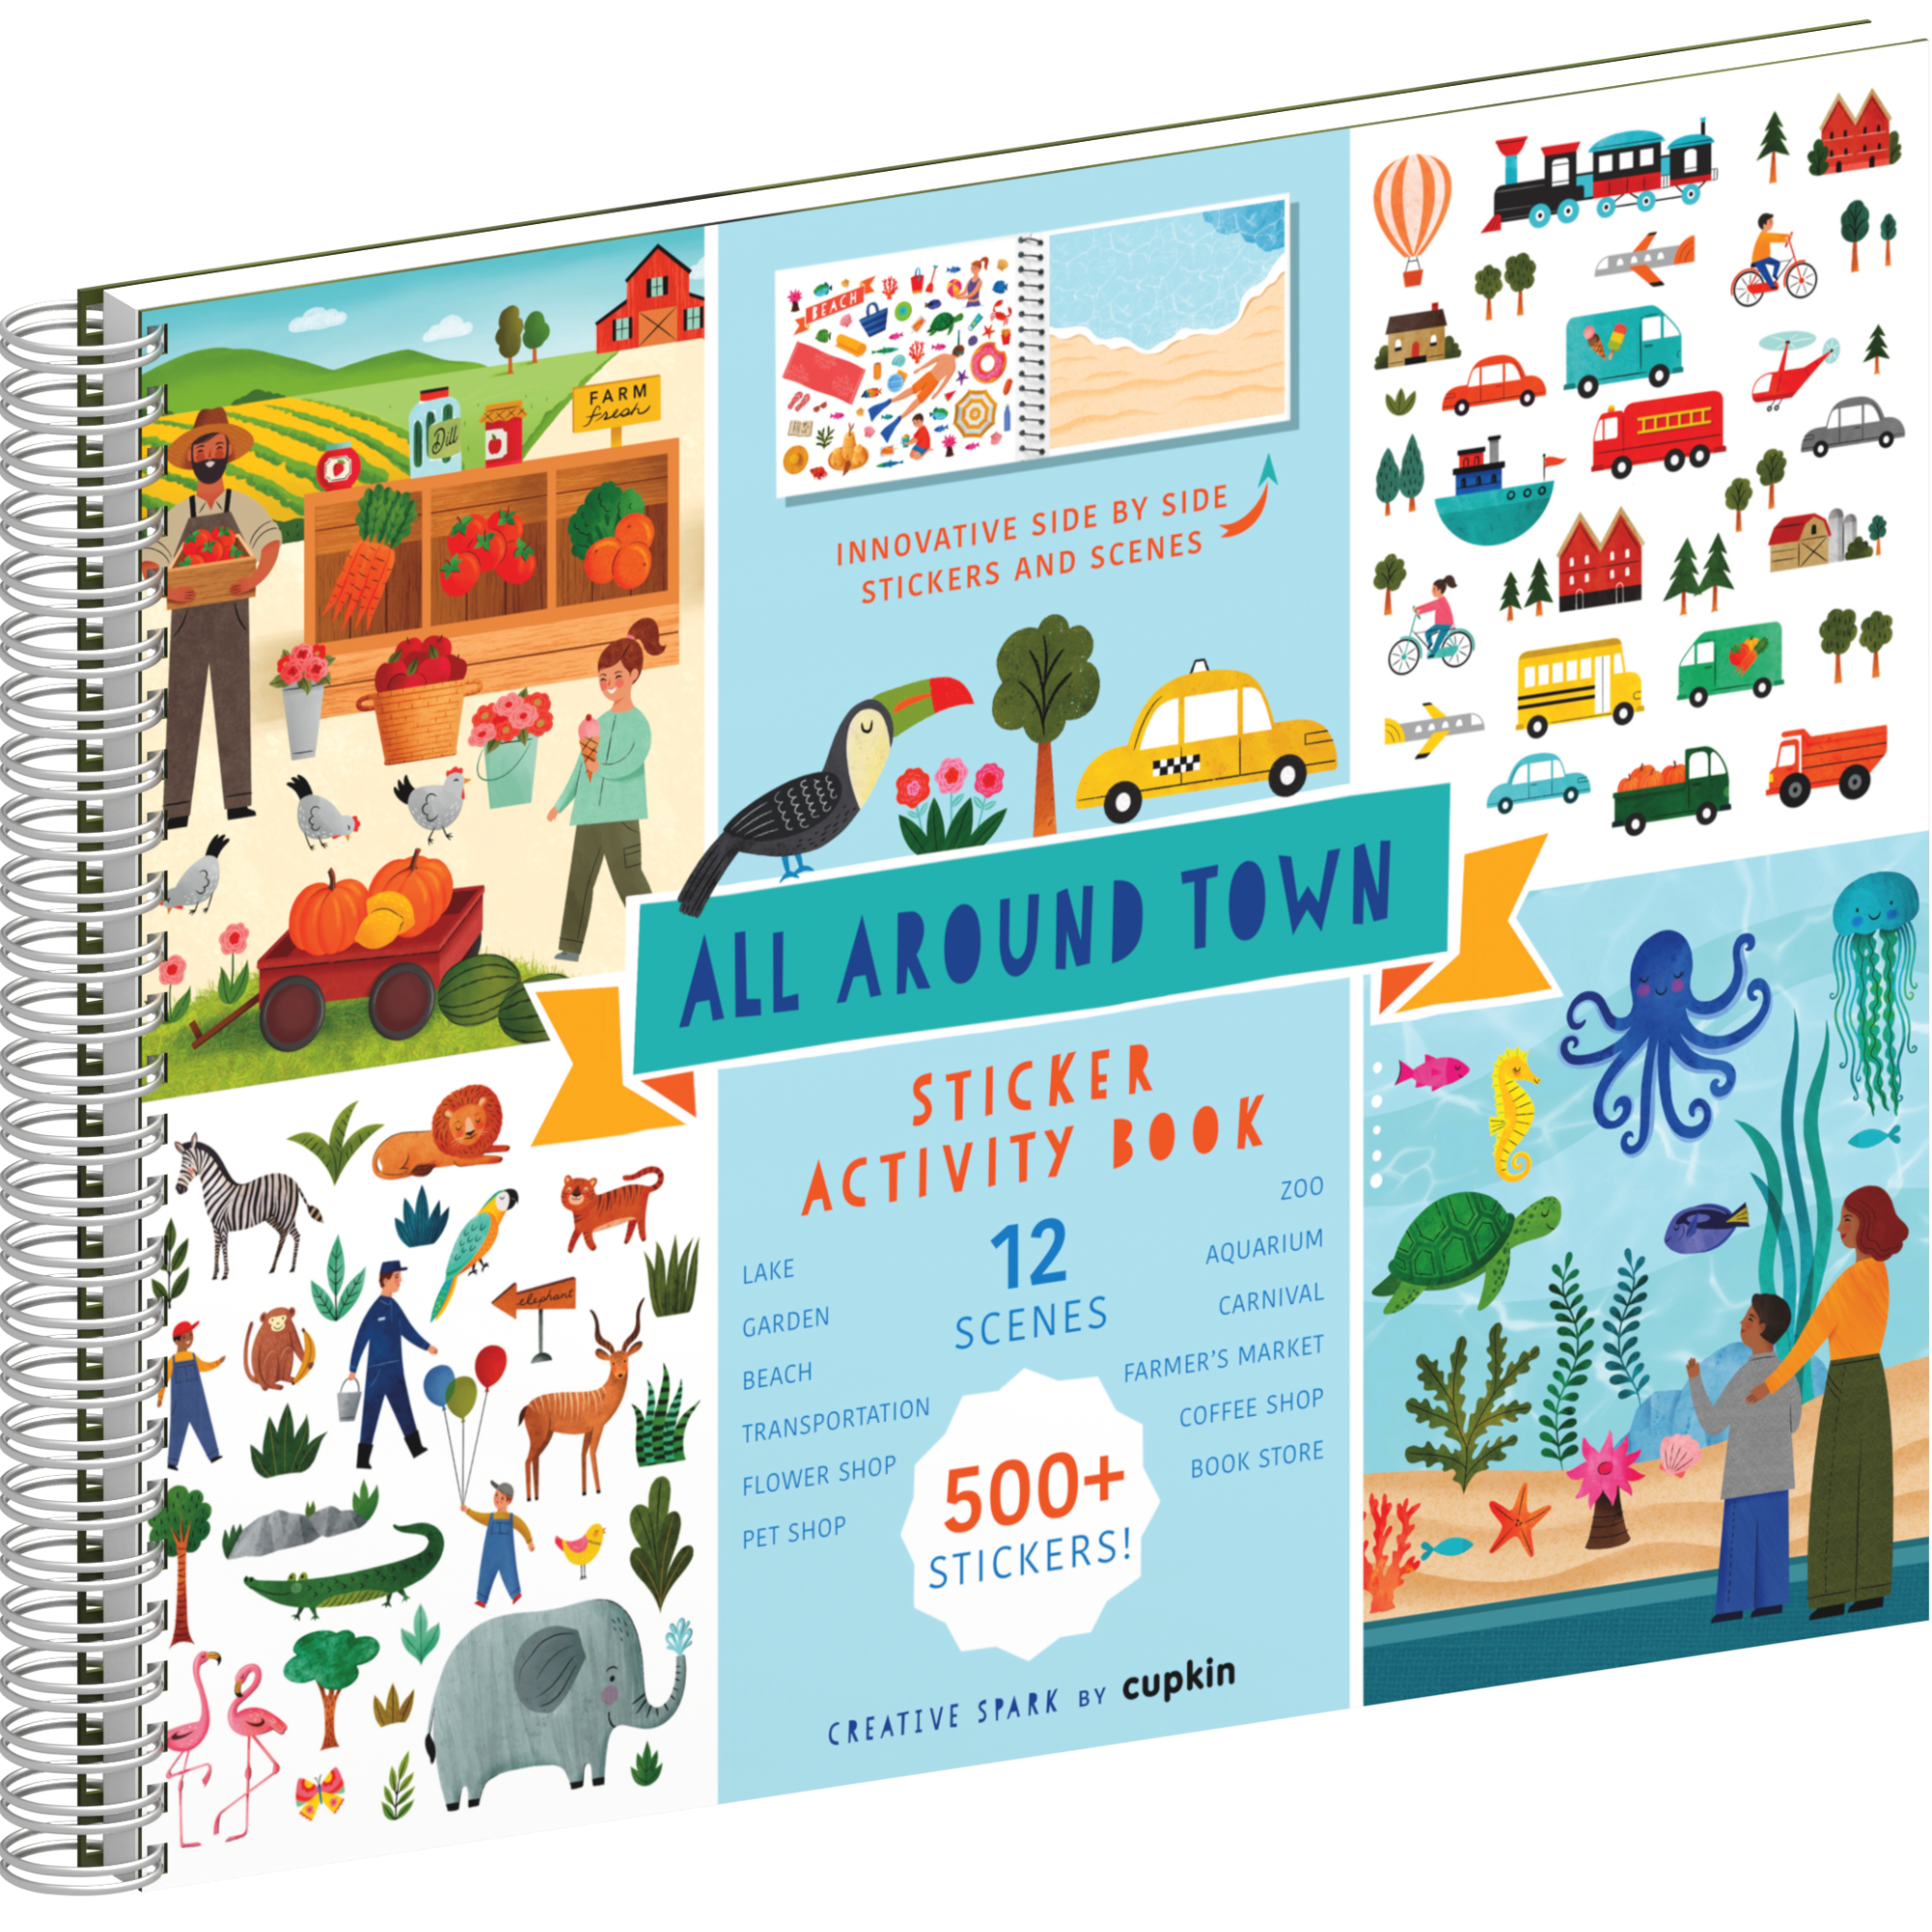 Cars, Trucks, Planes & Trains Activity Book by Cupkin: Innovative Side by Side Sticker Books - Spiral Binding allows The Car Sticker Book to Lay